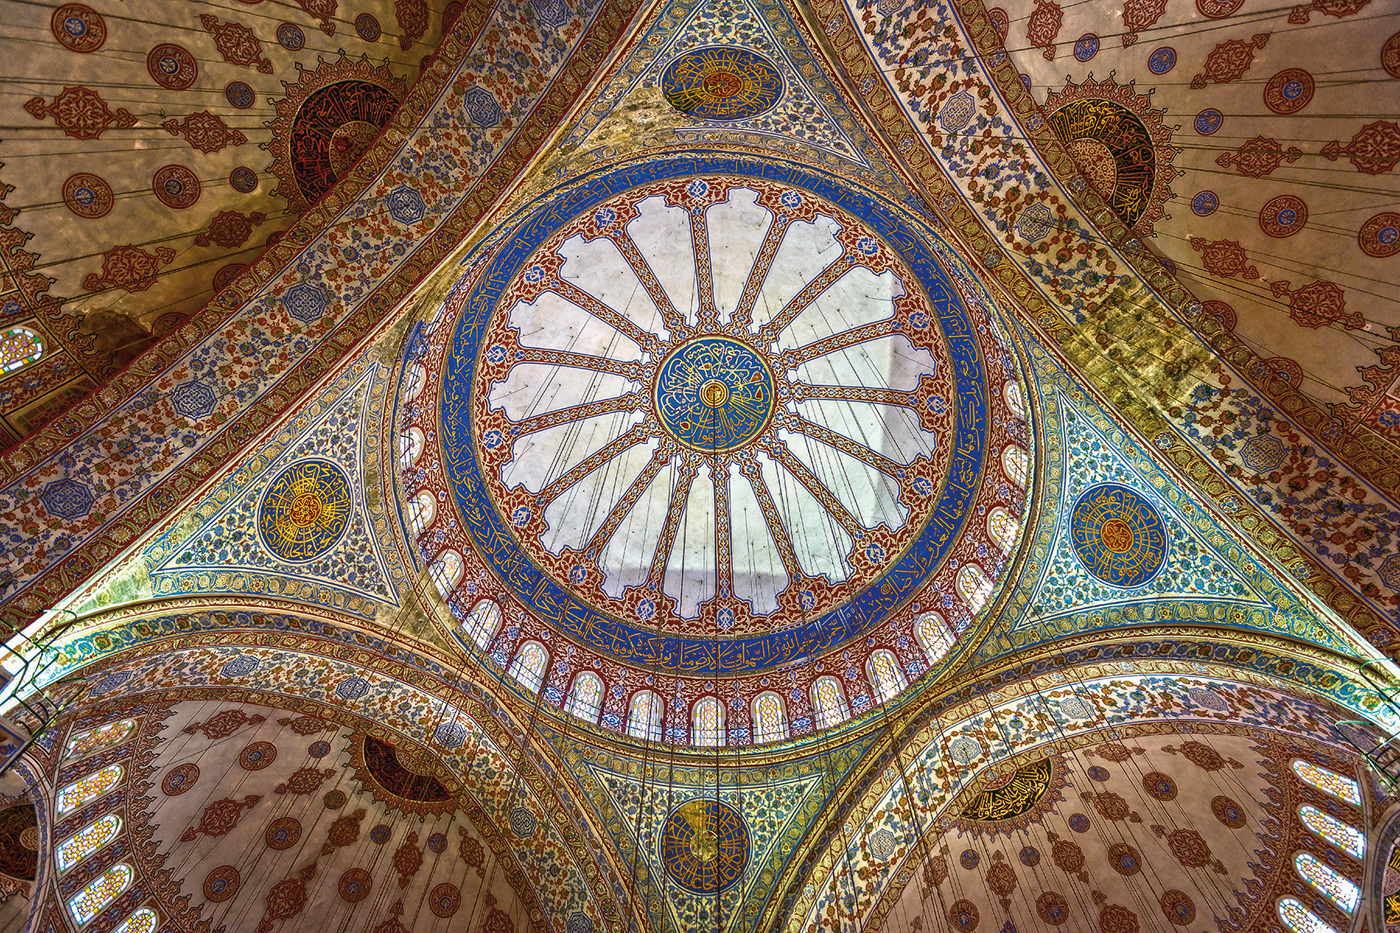 The vaulted ceiling, domes, columns and walls of the Sultan Ahmed Mosque, or “Blue Mosque,” in Istanbul, Turkey, are covered with some 20,000 hand-painted ceramic tiles that feature more than 50 designs. The tiles were produced in Iznik, which at the time of the mosque’s construction, between 1609 and 1616, had become the leading ceramics center of Ottoman Turkey. 